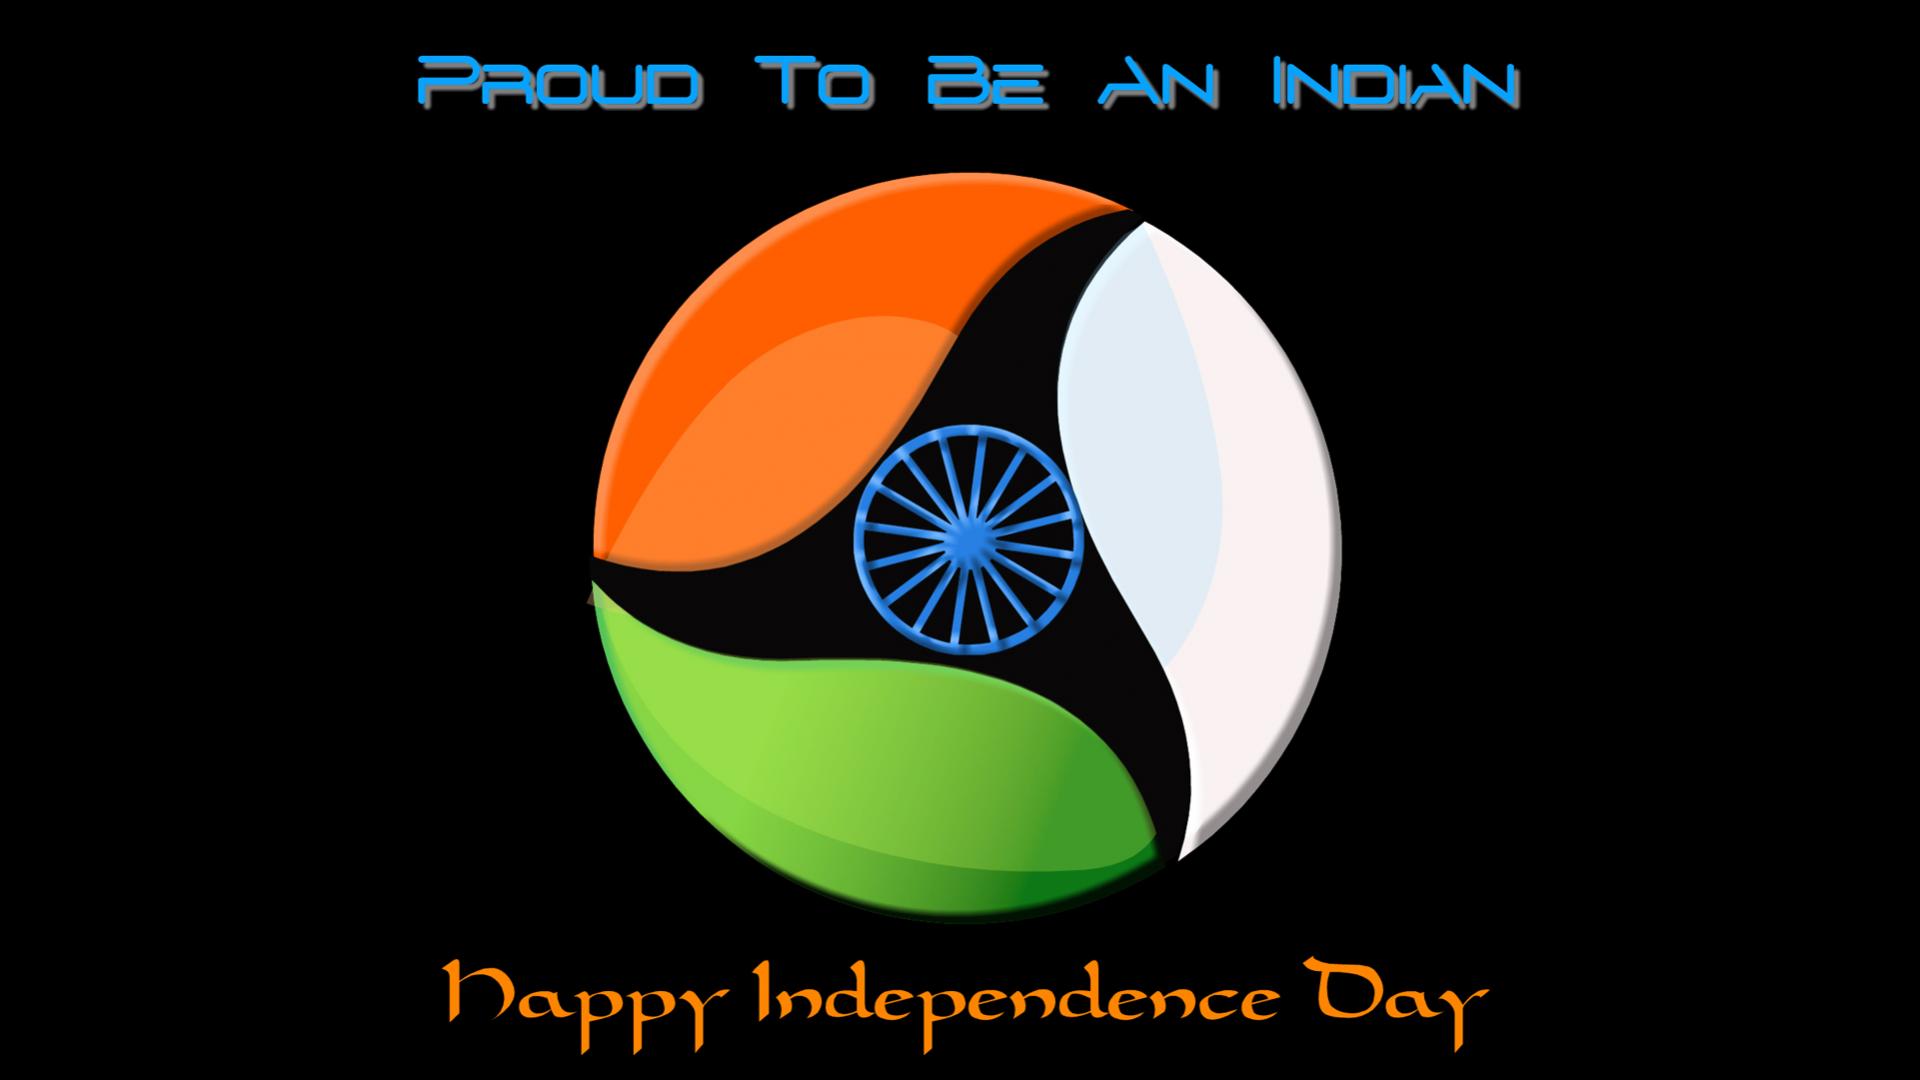 Happy Independence Day 3D Image For Free Wallpaper. Wallpaper Download. High Resolution Wallpaper